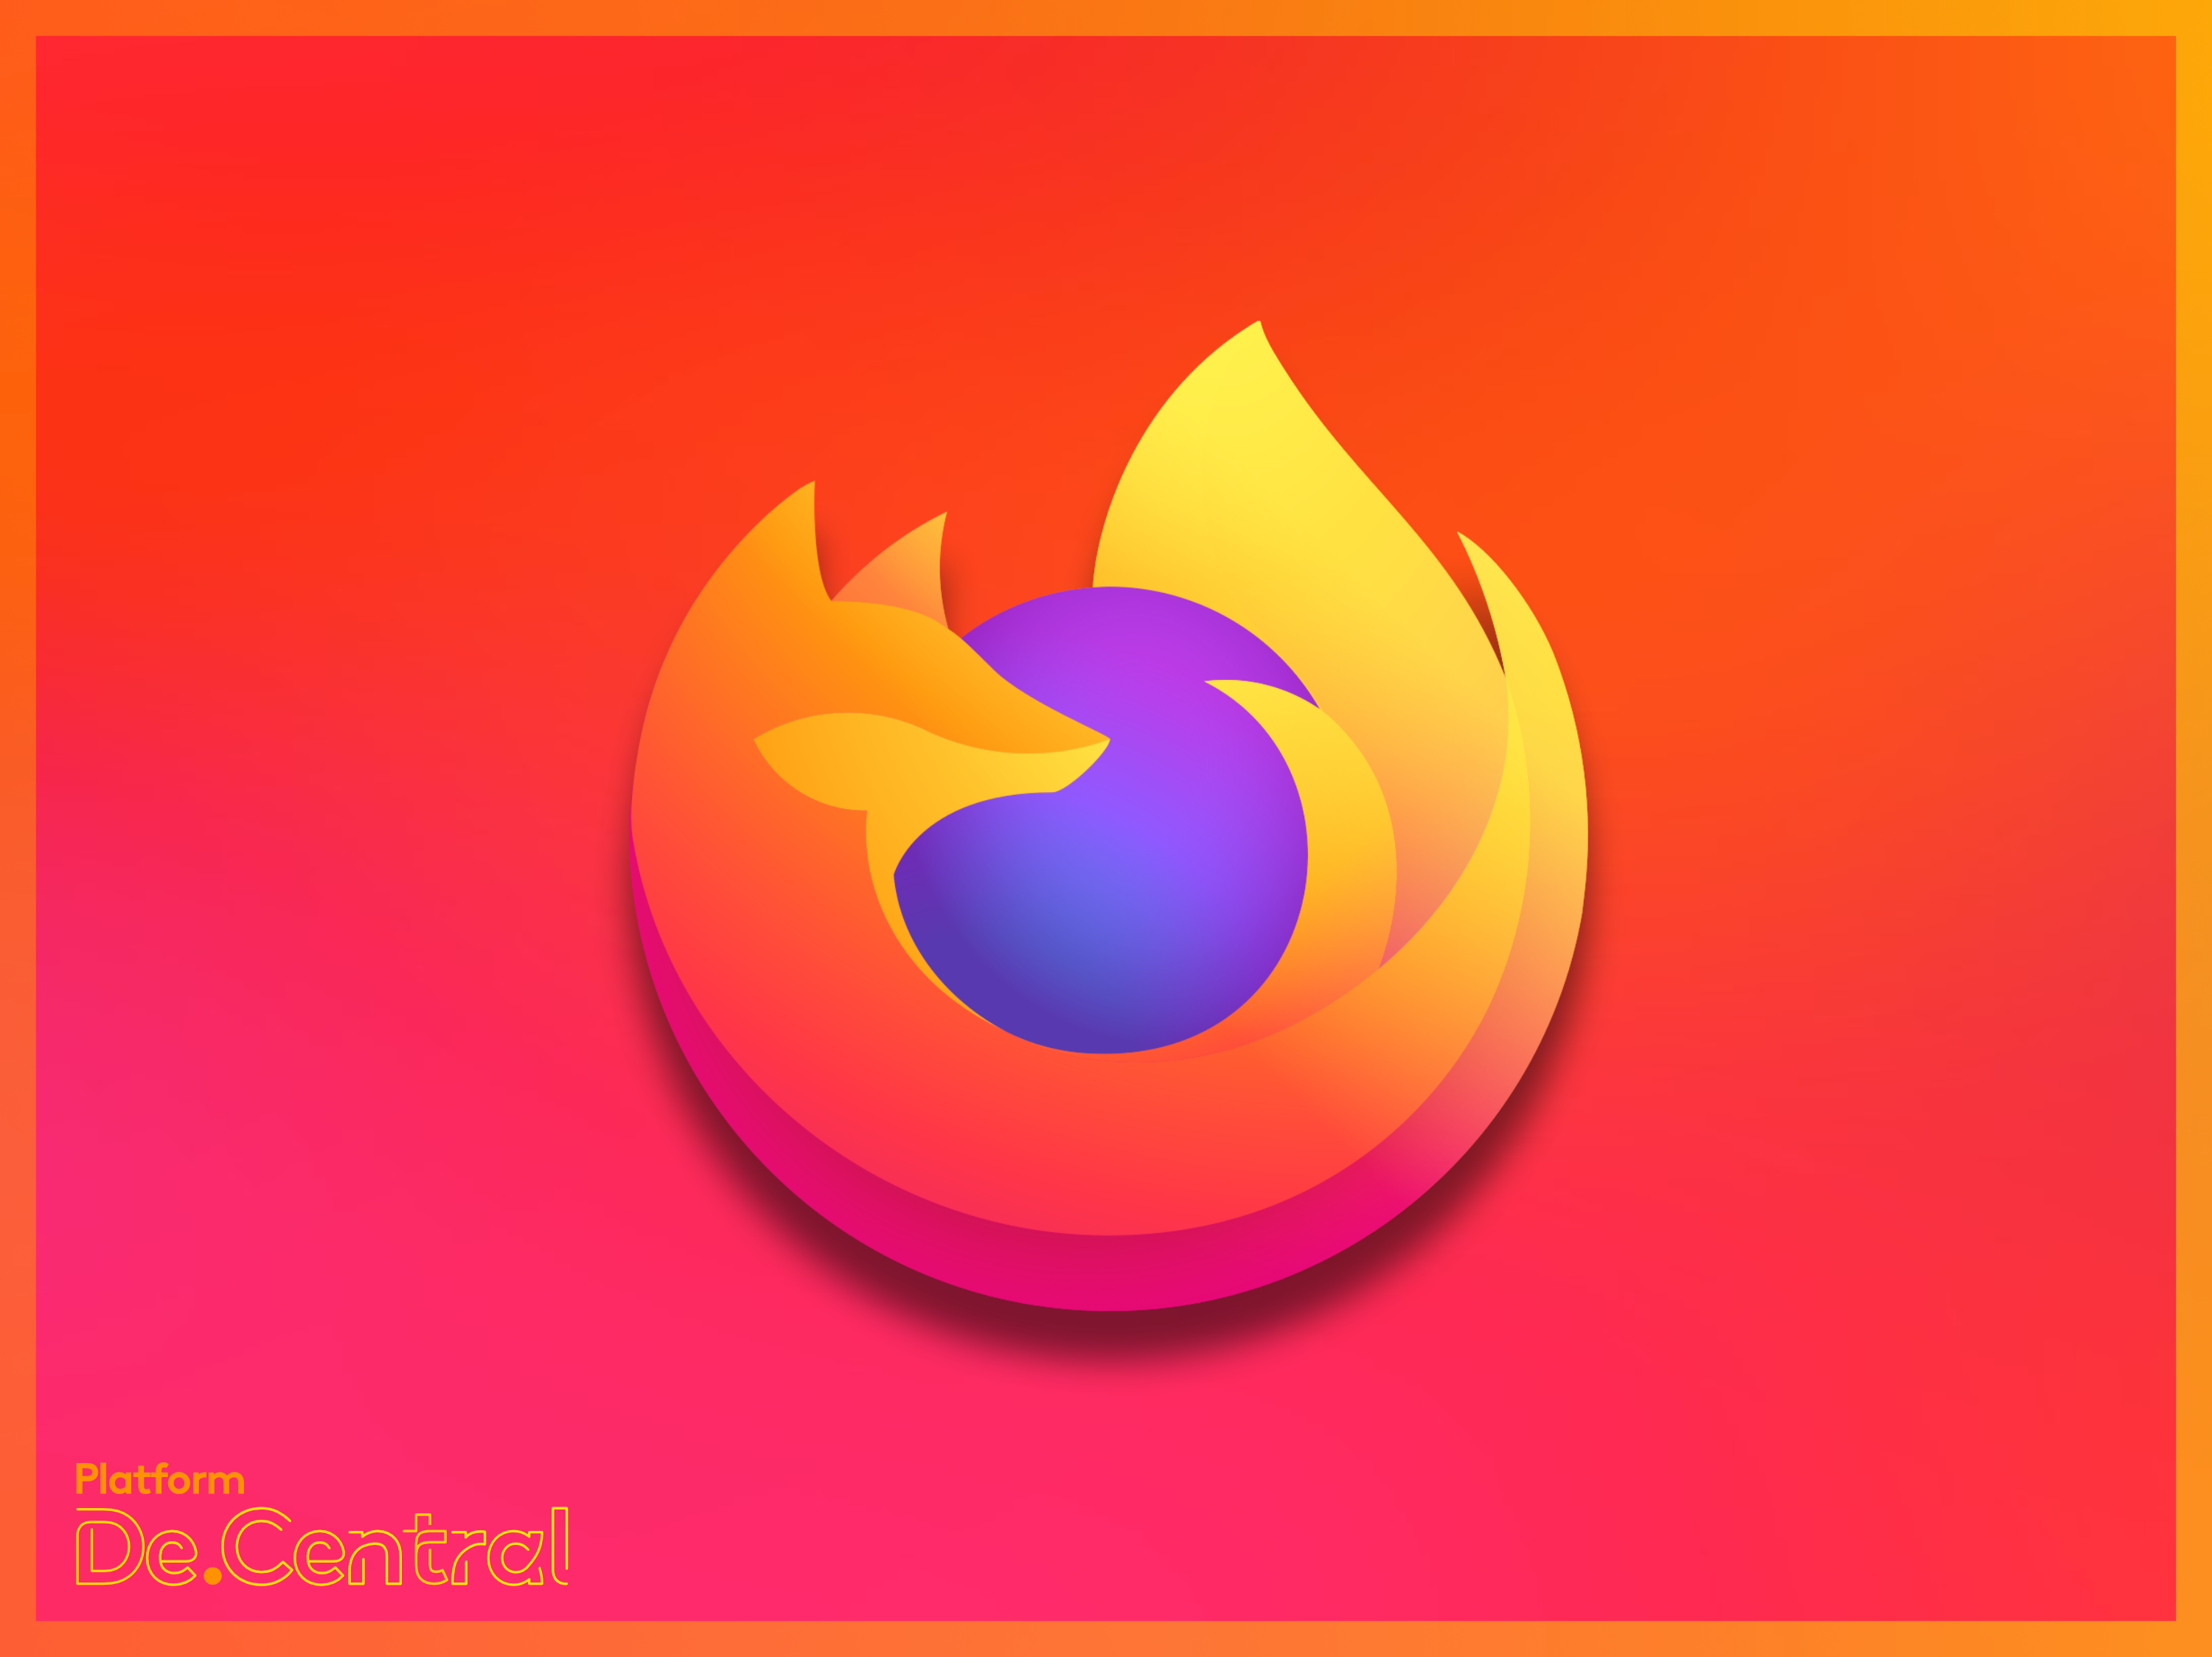 Watch videos with others remotely using this FireFox Add-on